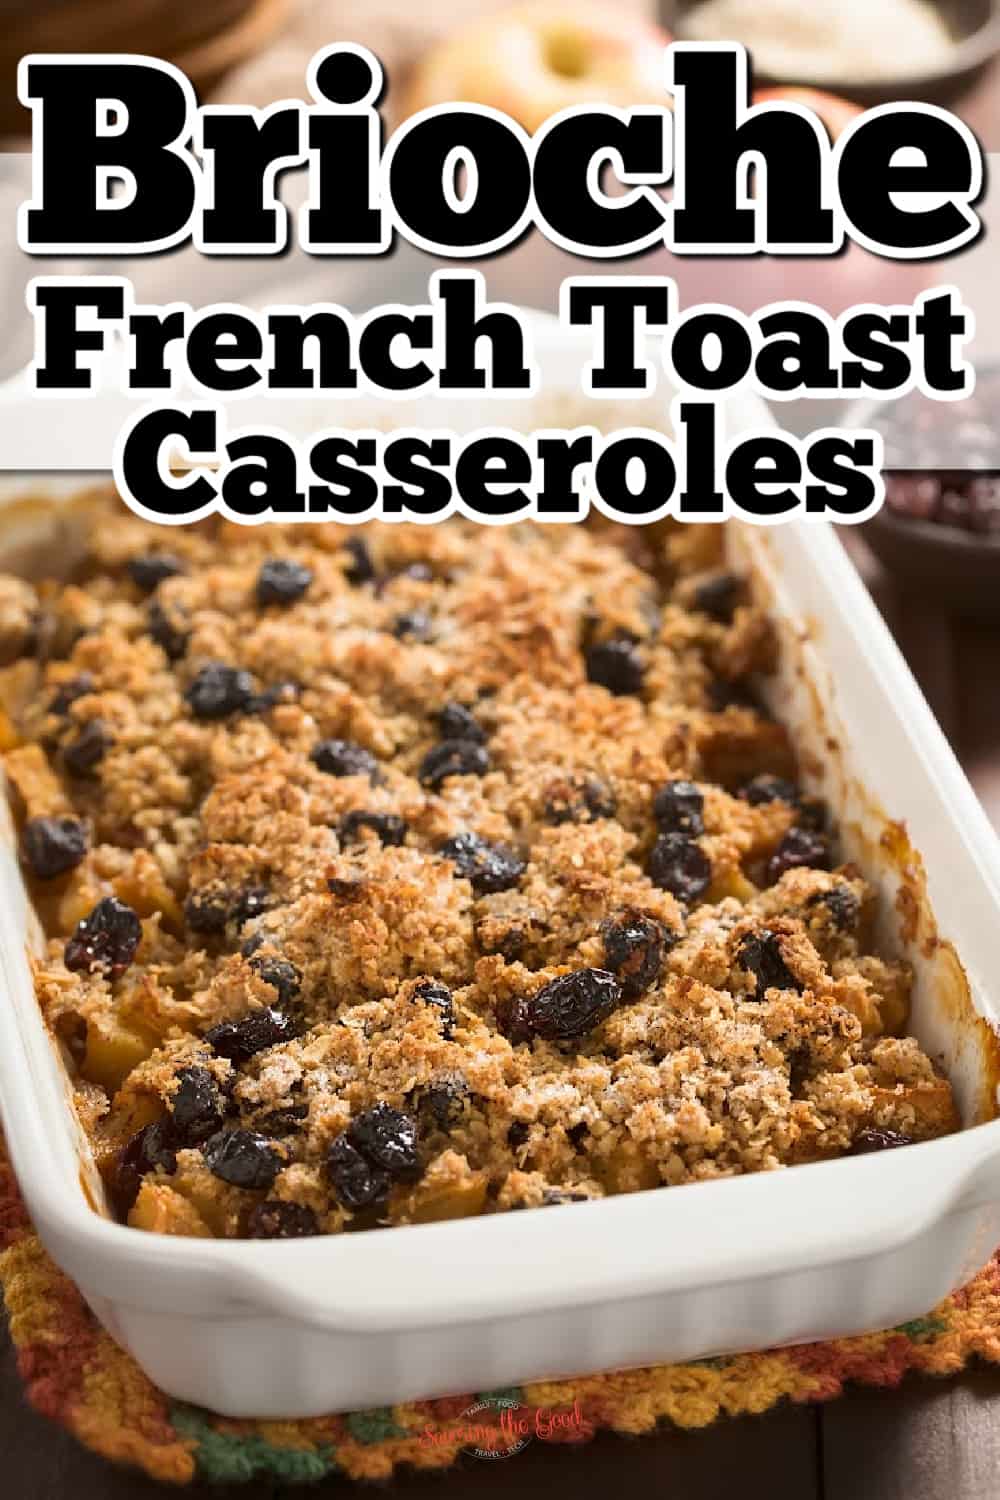 brioche french toast casseroles recipes with text overlay for Pinterest.